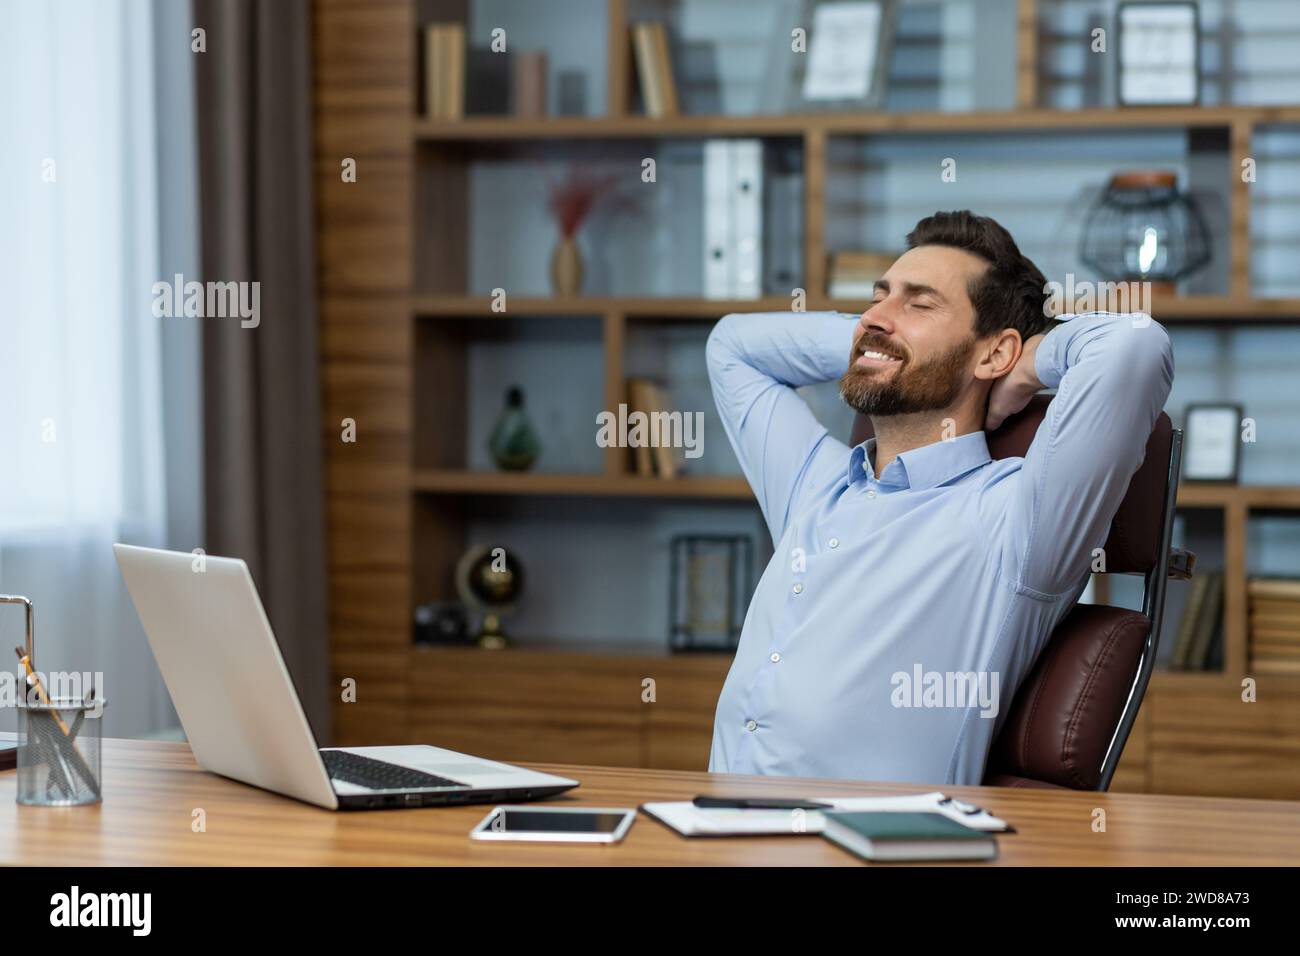 Content mature businessman taking a break, relaxing with hands behind his head in a well-organized home office setting. Stock Photo